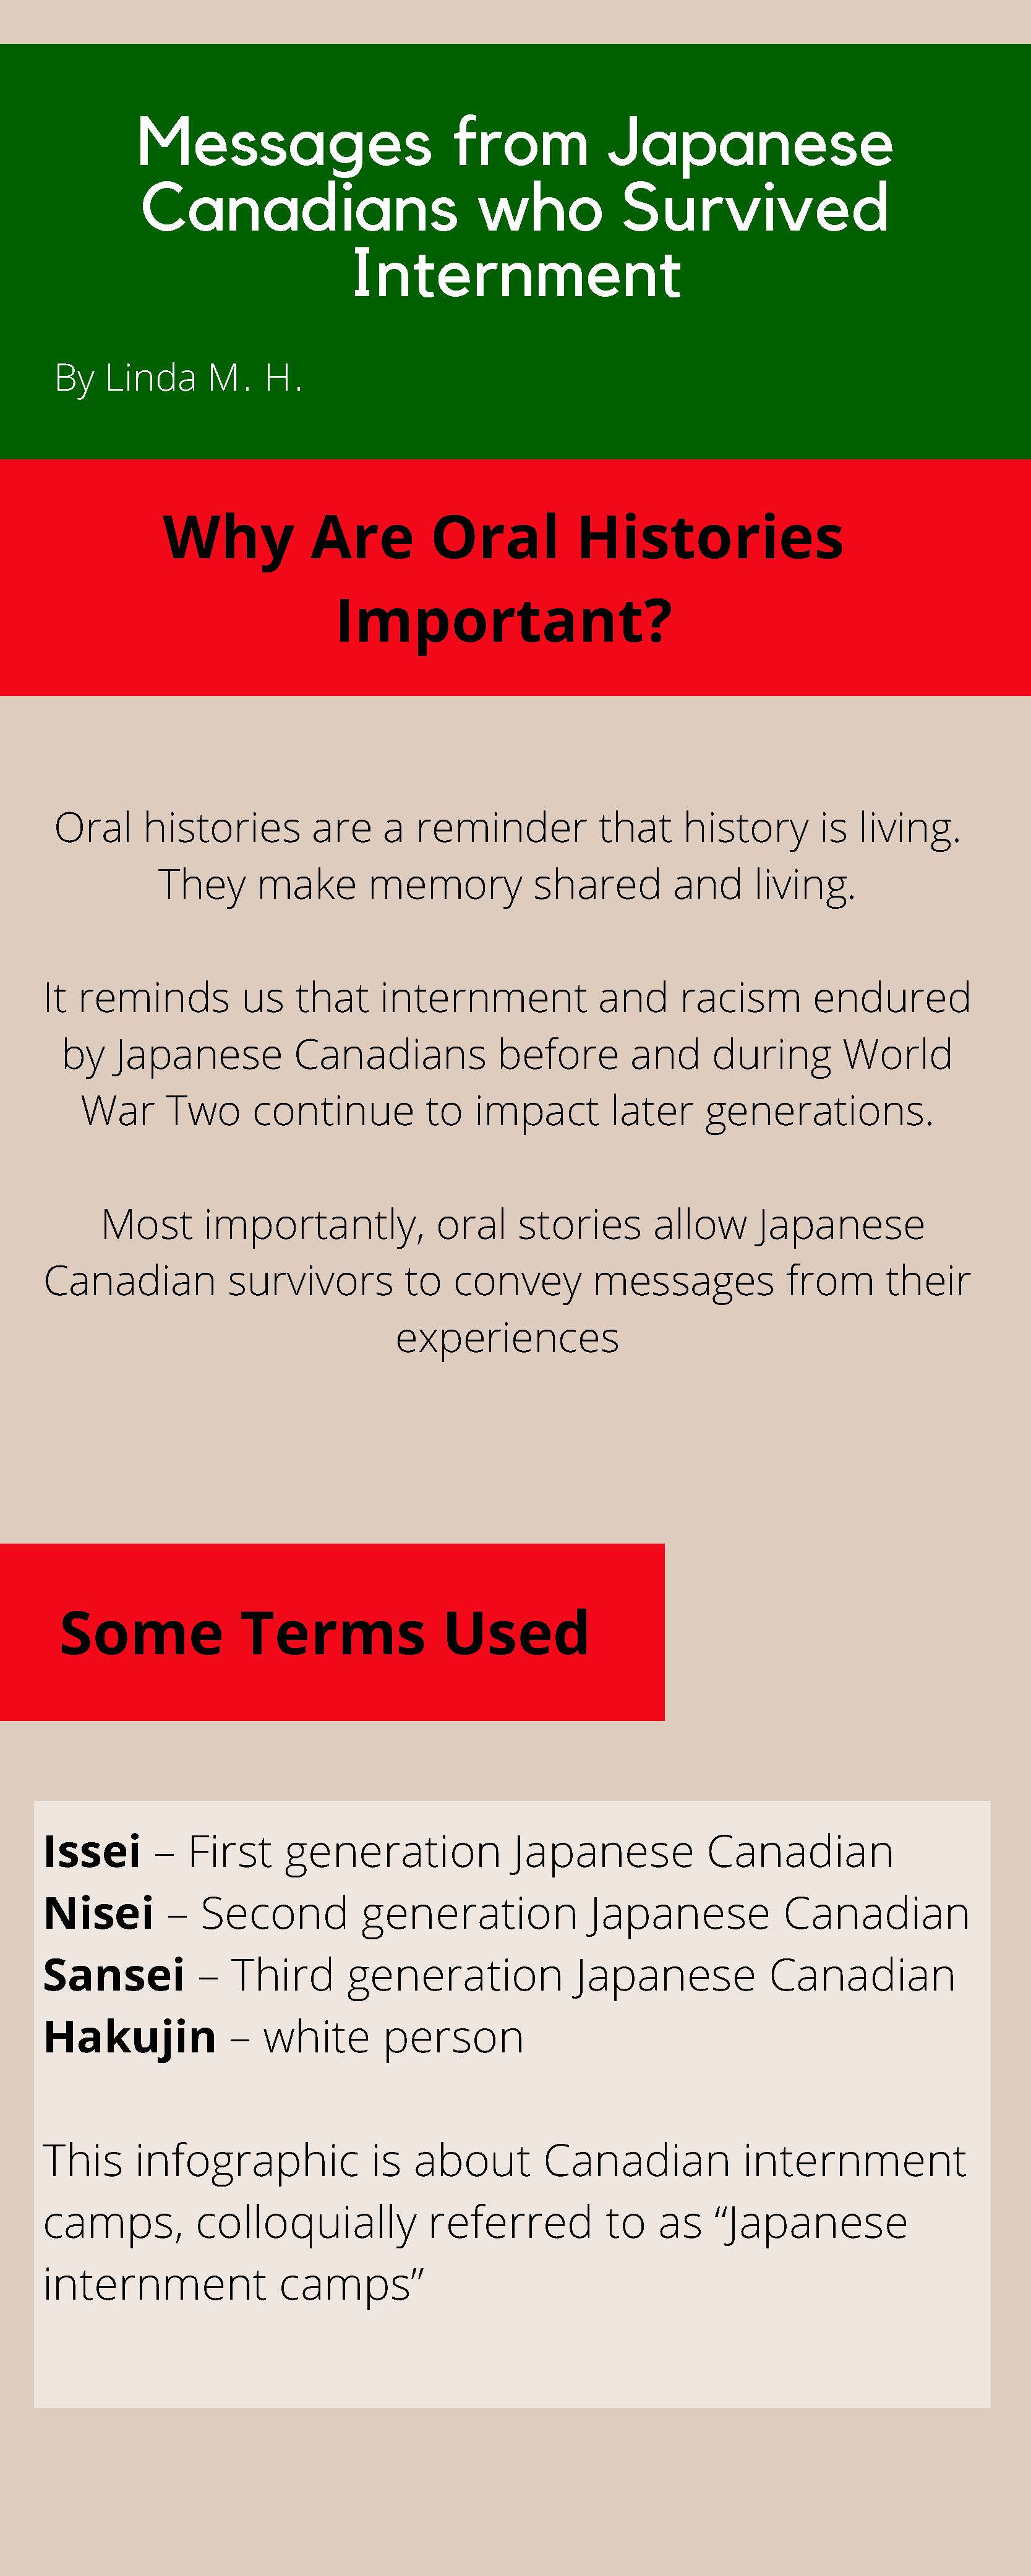 Messages-from-Japanese-Canadians.-L.M.H._Page_1.jpg